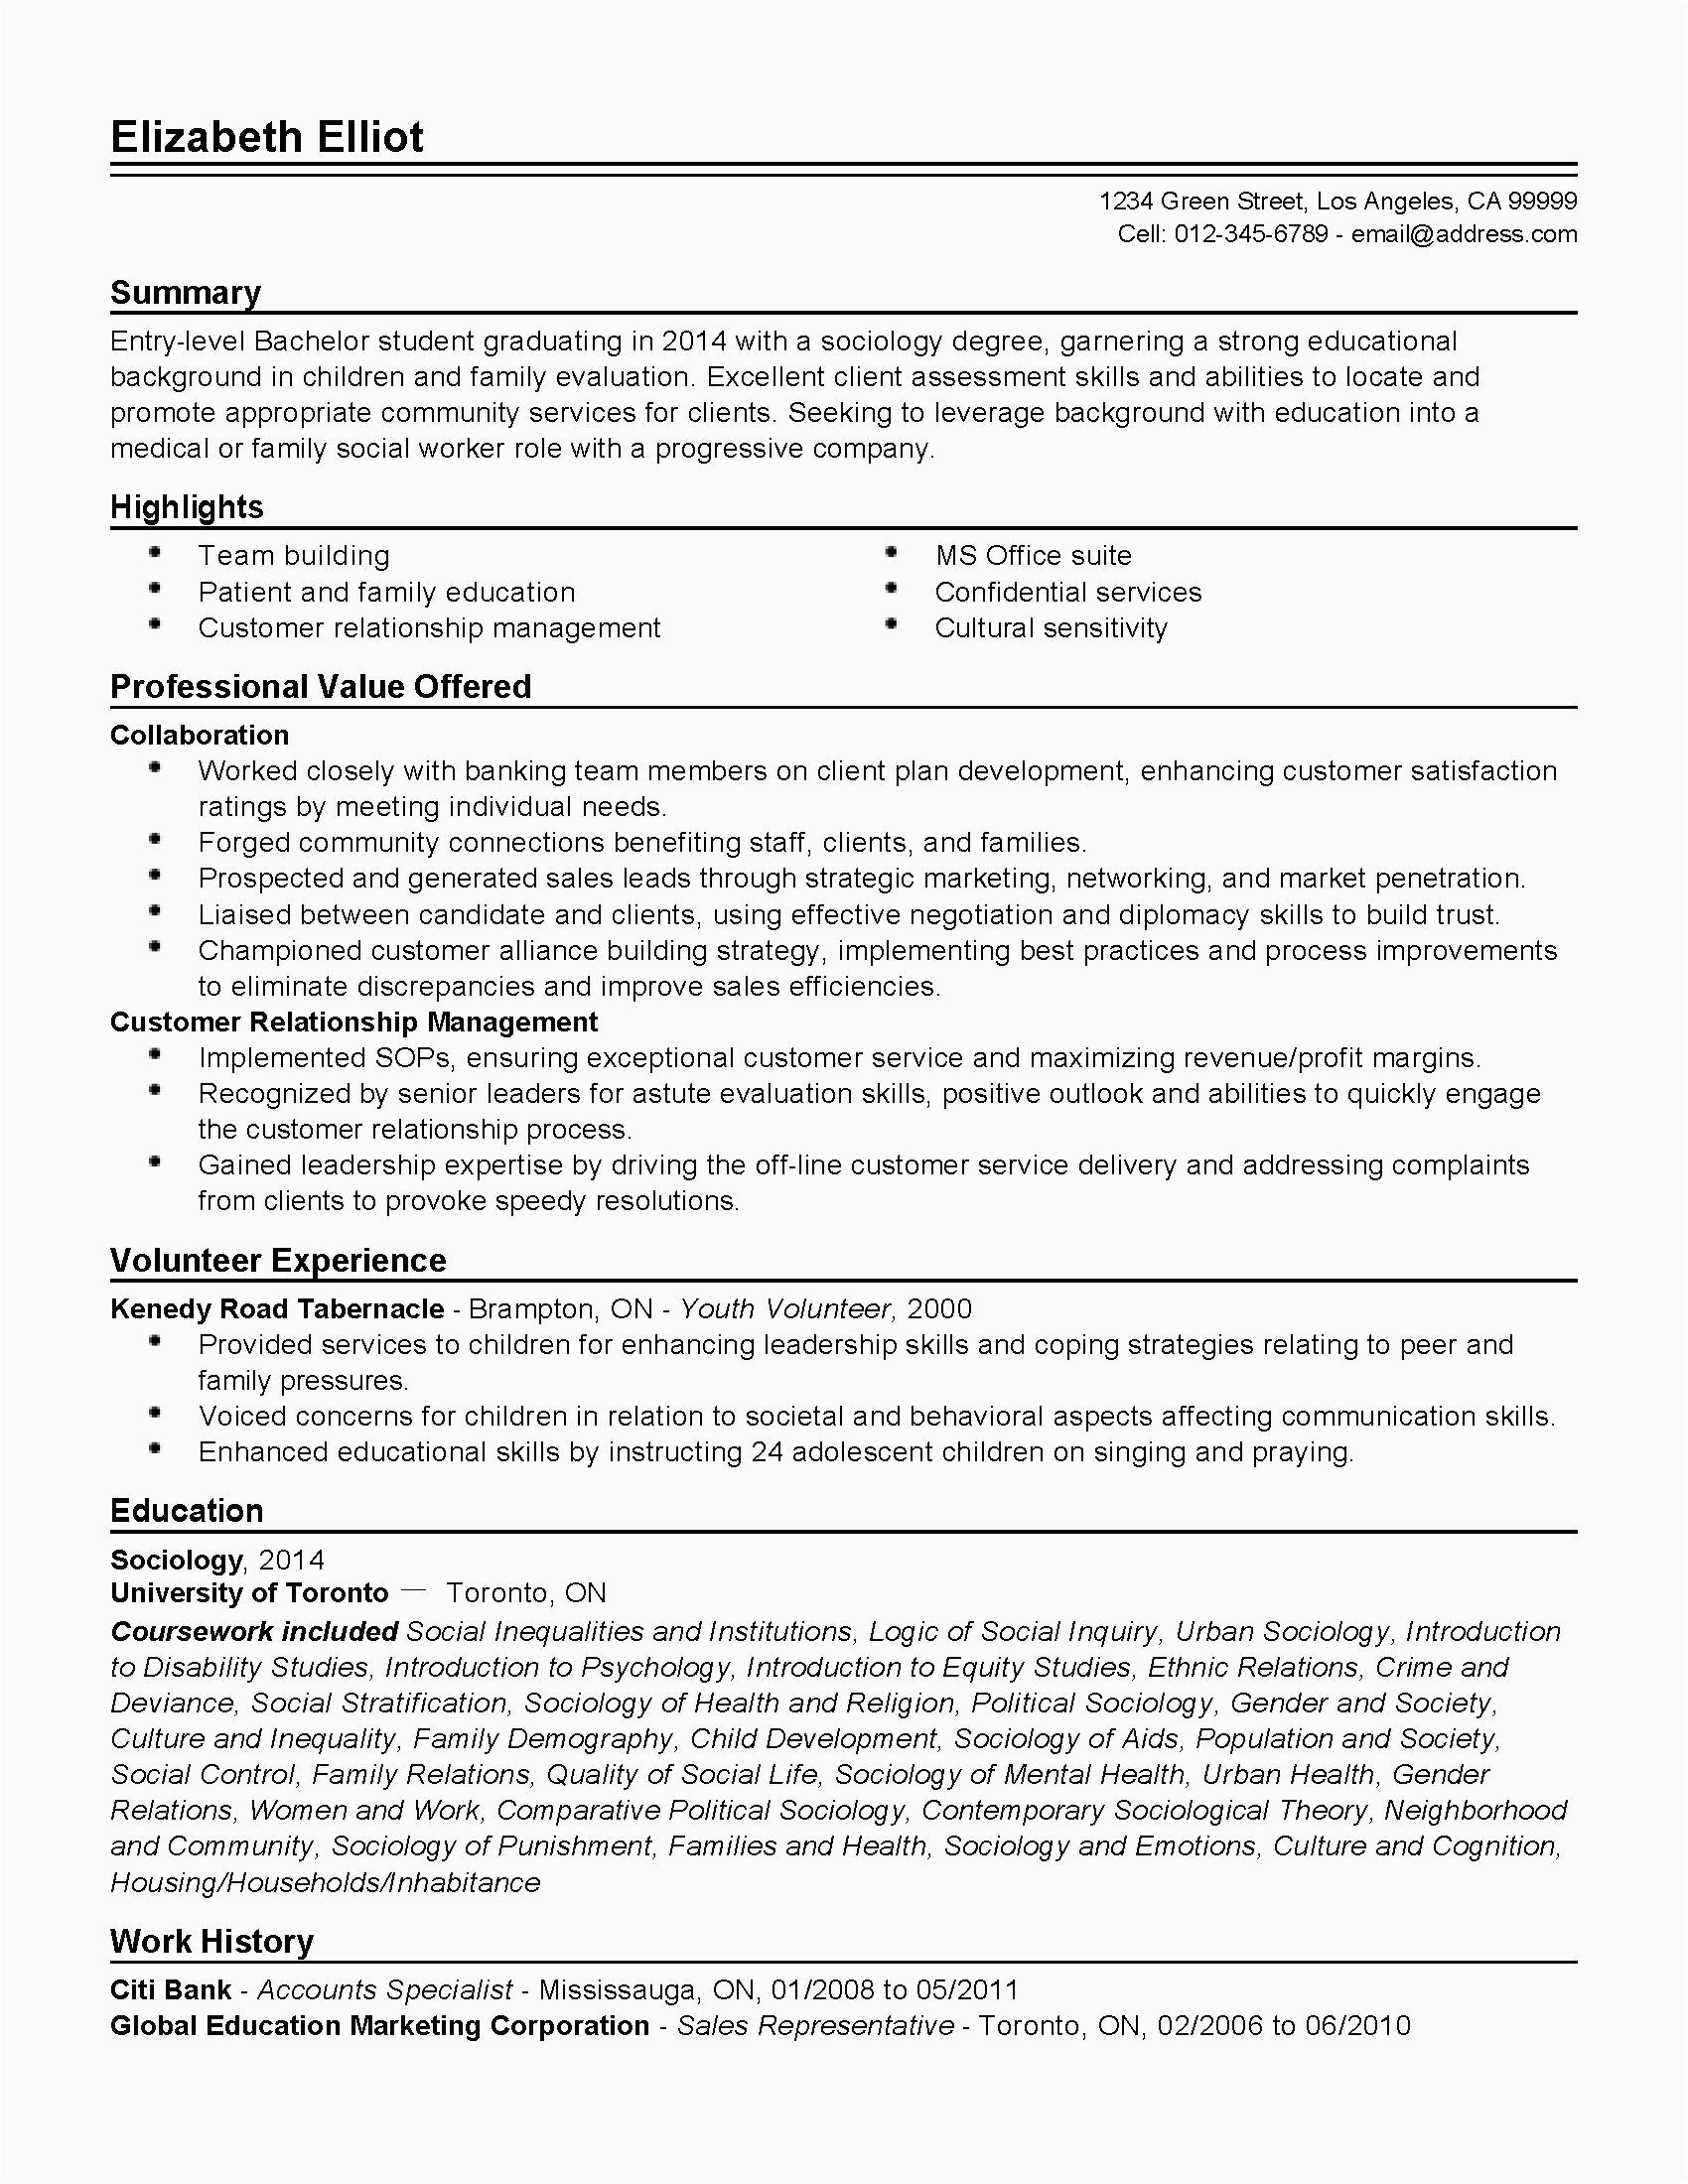 Social Service Worker Student Resume Sample Professional Entry Level social Worker Templates to Showcase Your